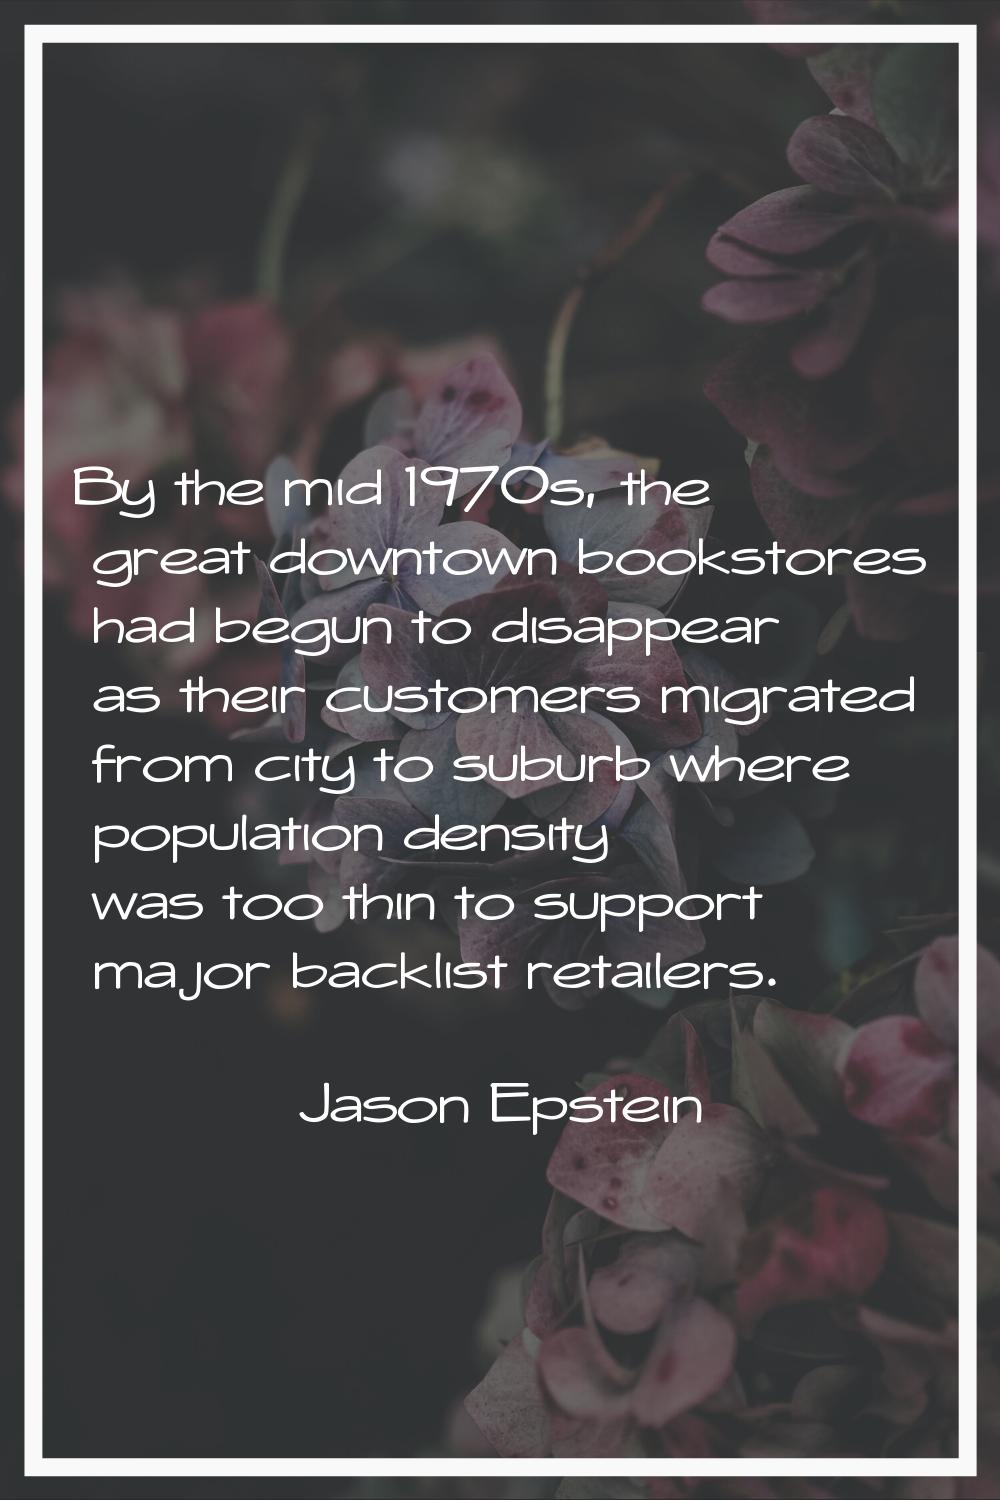 By the mid 1970s, the great downtown bookstores had begun to disappear as their customers migrated 